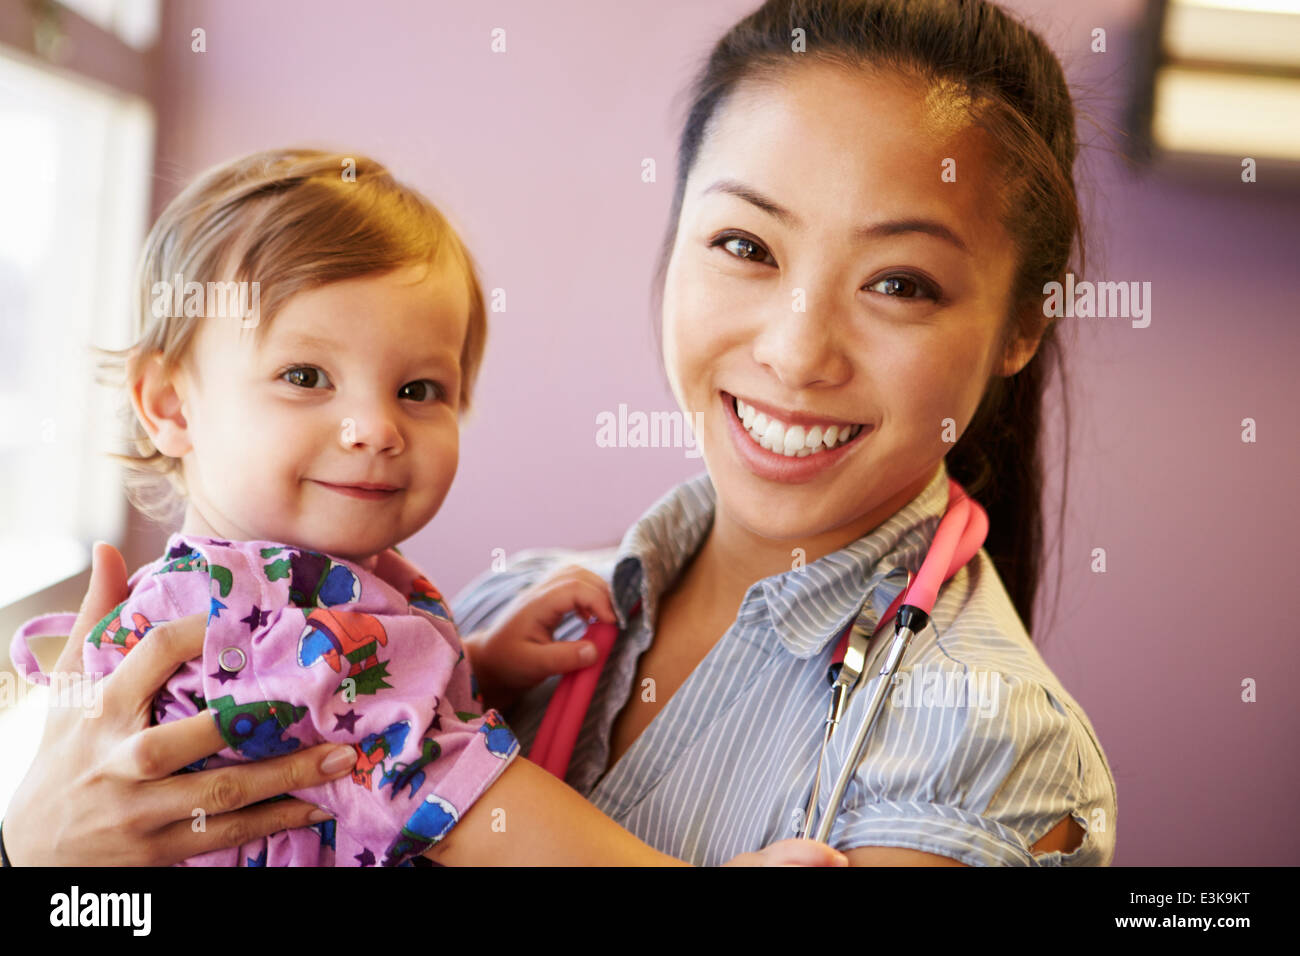 Young Girl Being Held By Female Pediatric Doctor Stock Photo